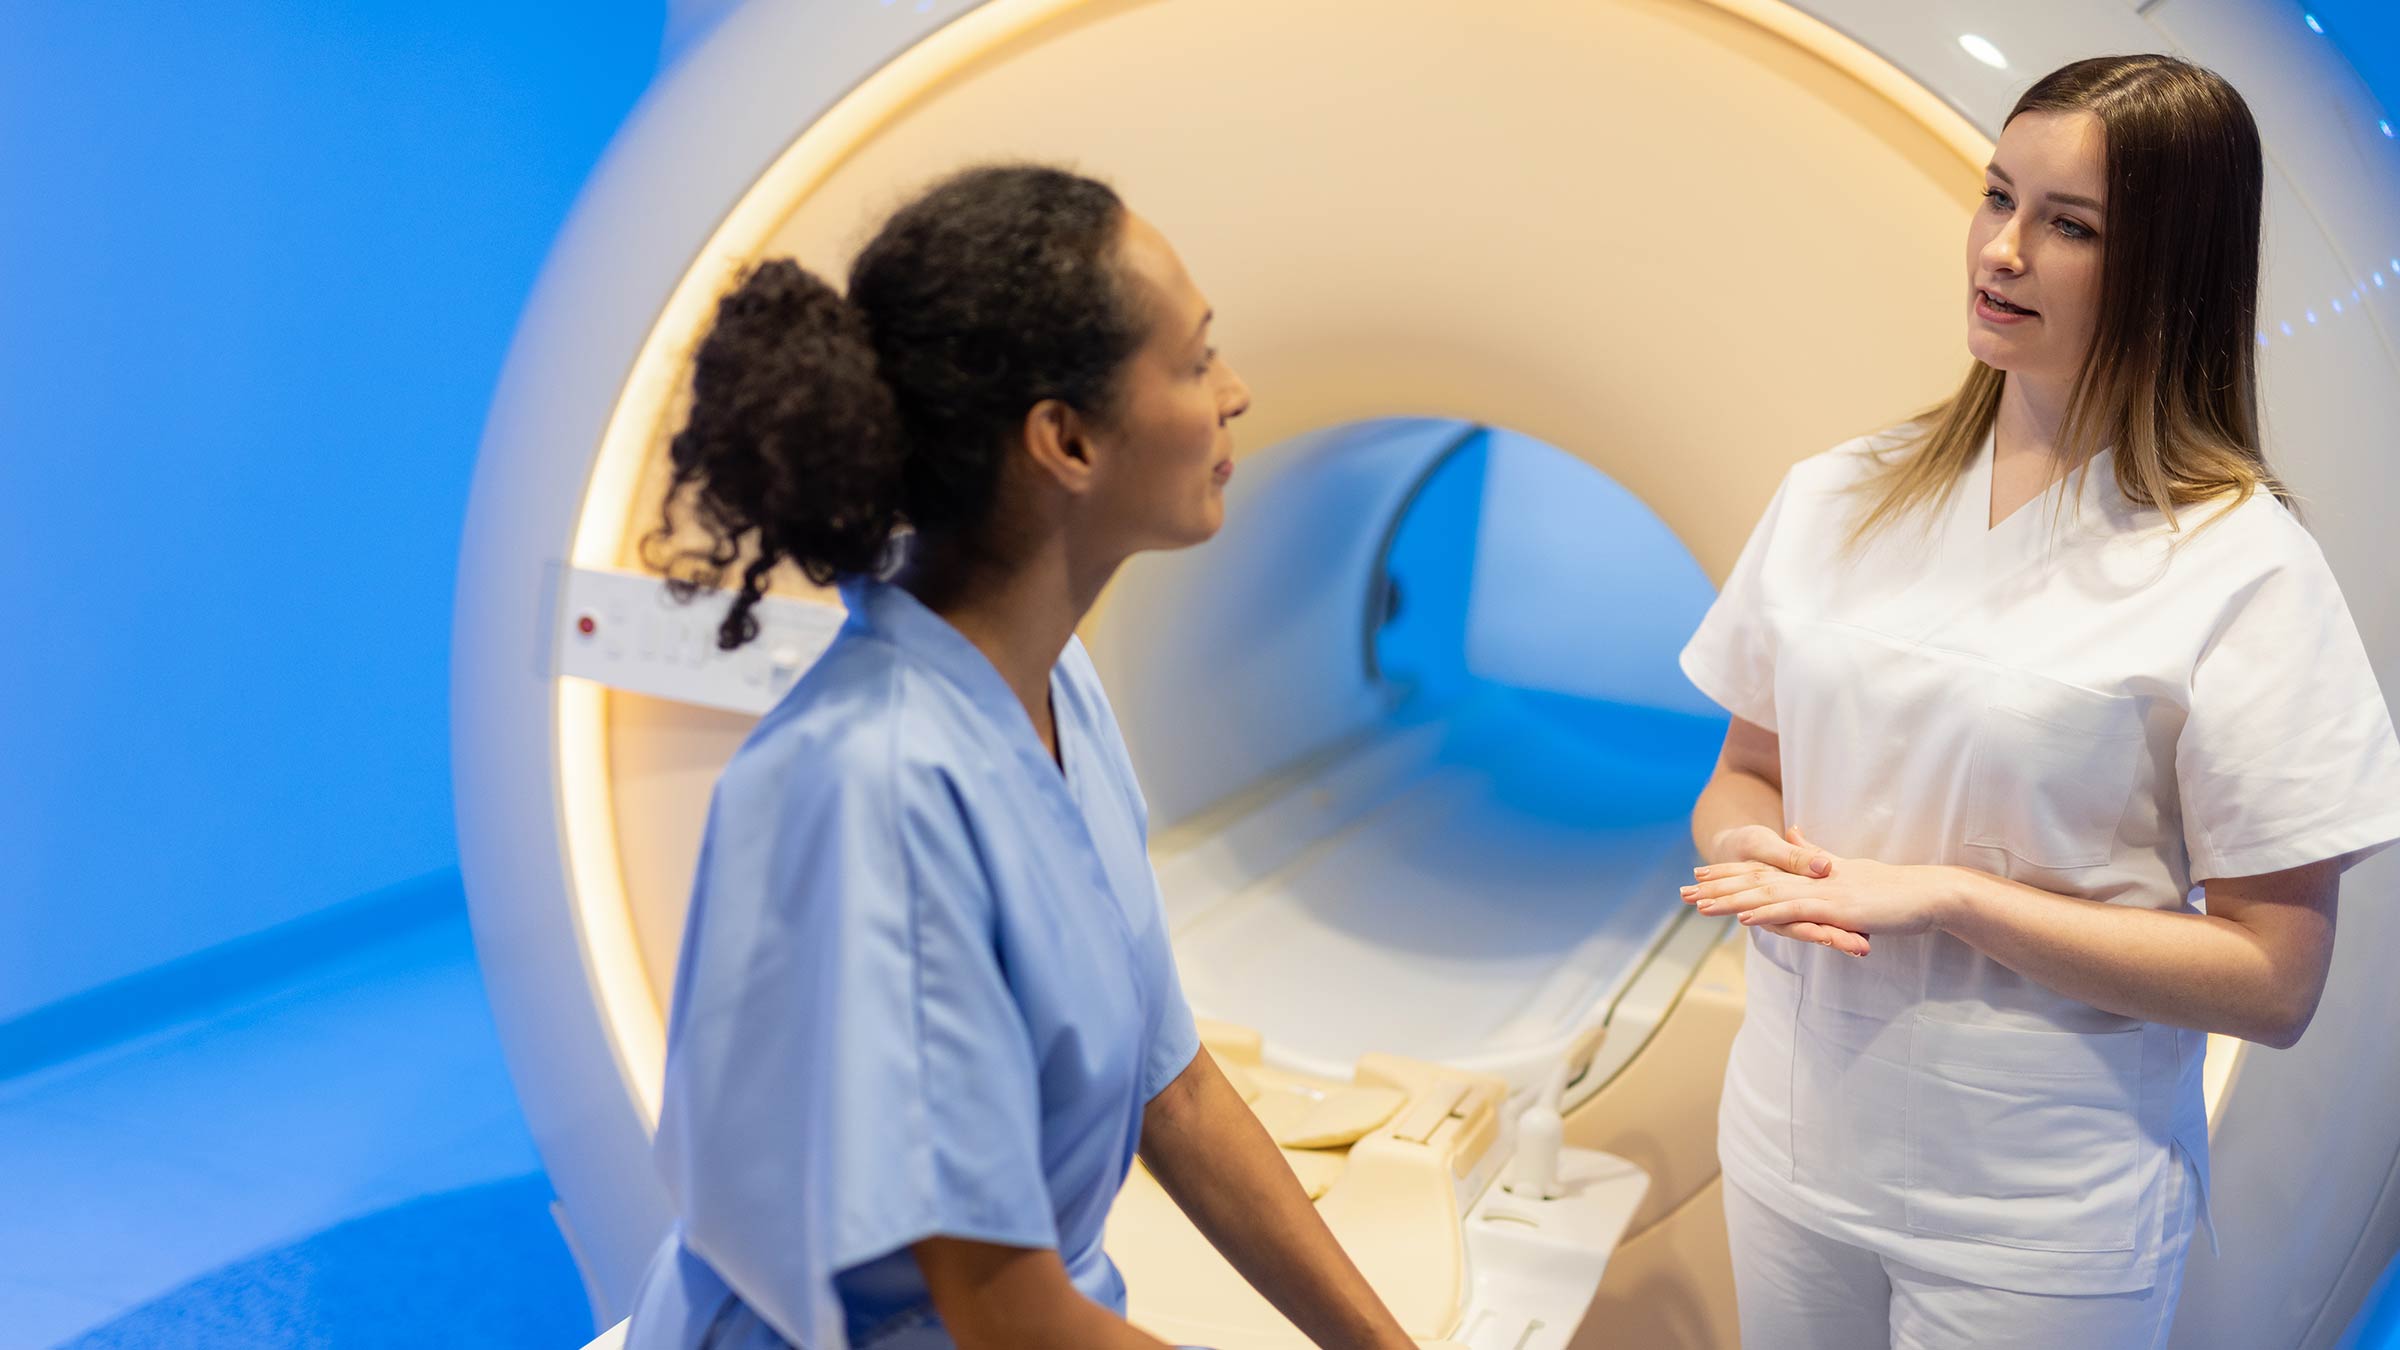 Should a preventive full-body MRI be considered for screening?